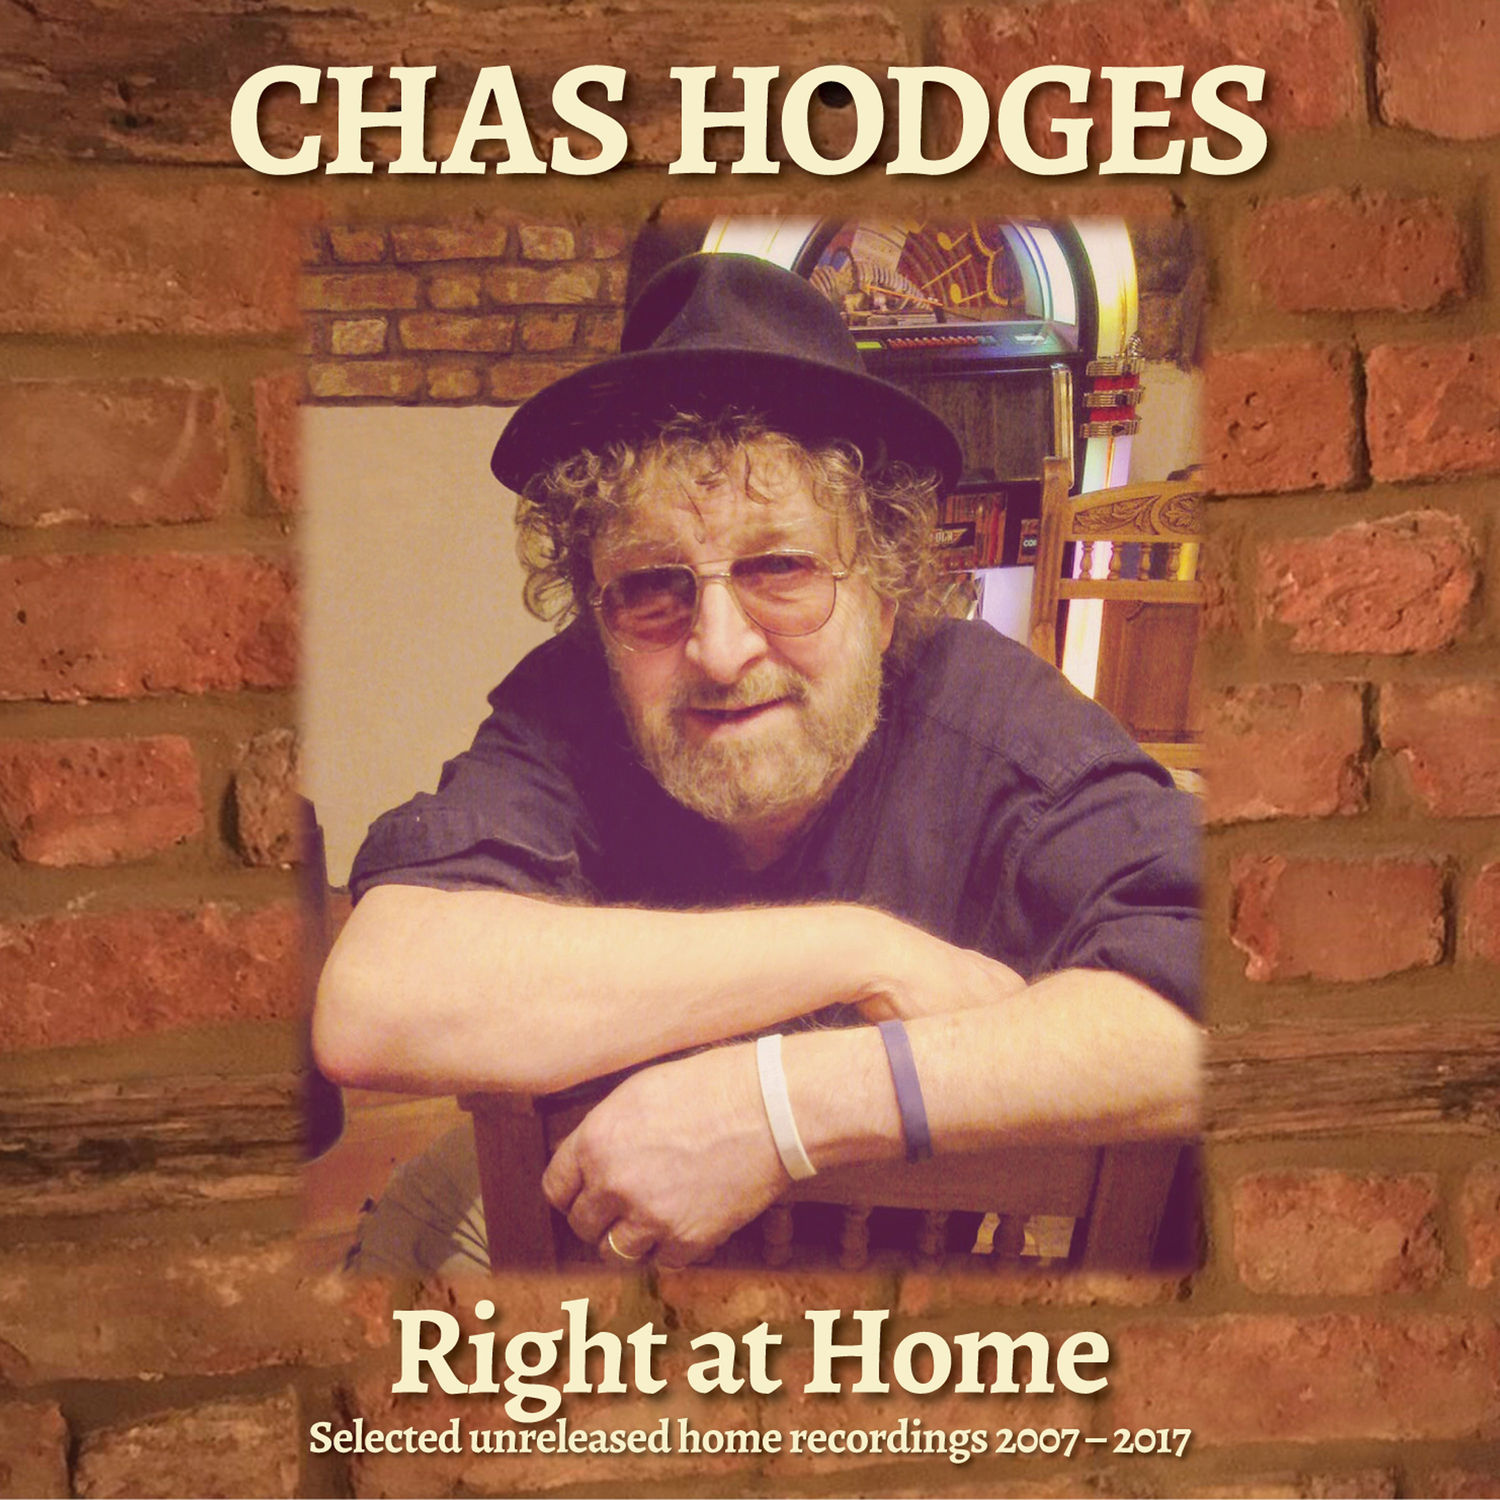 Chas Hodges – Right at Home – Selected Unreleased Home Recordings 2007-2017 (2021) [FLAC 24bit/44,1kHz]